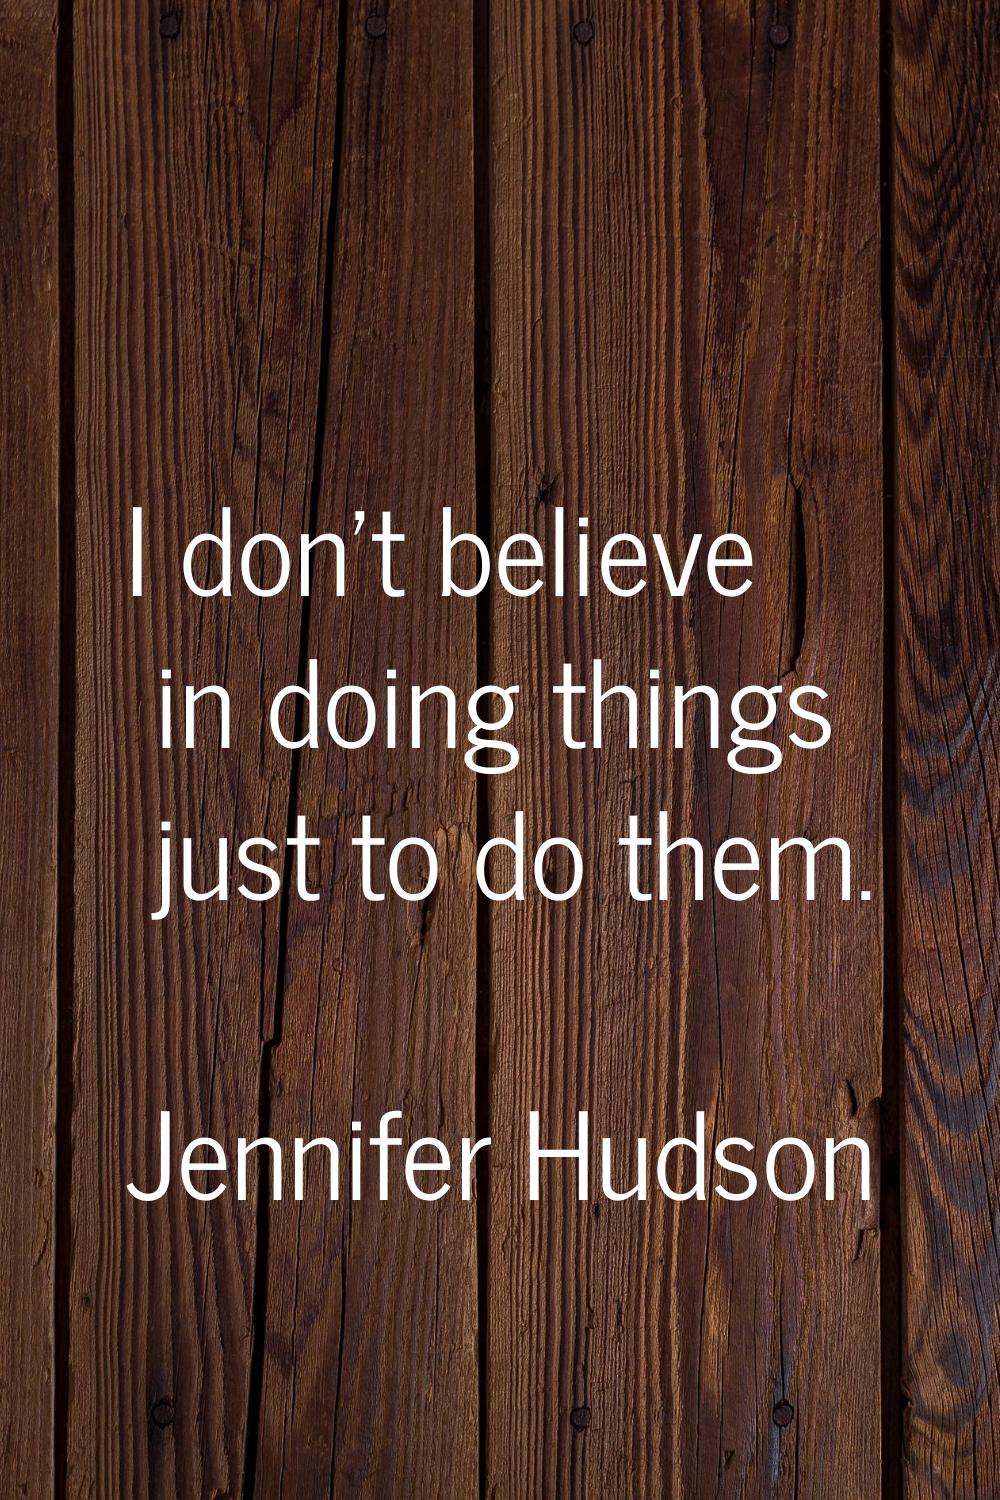 I don't believe in doing things just to do them.